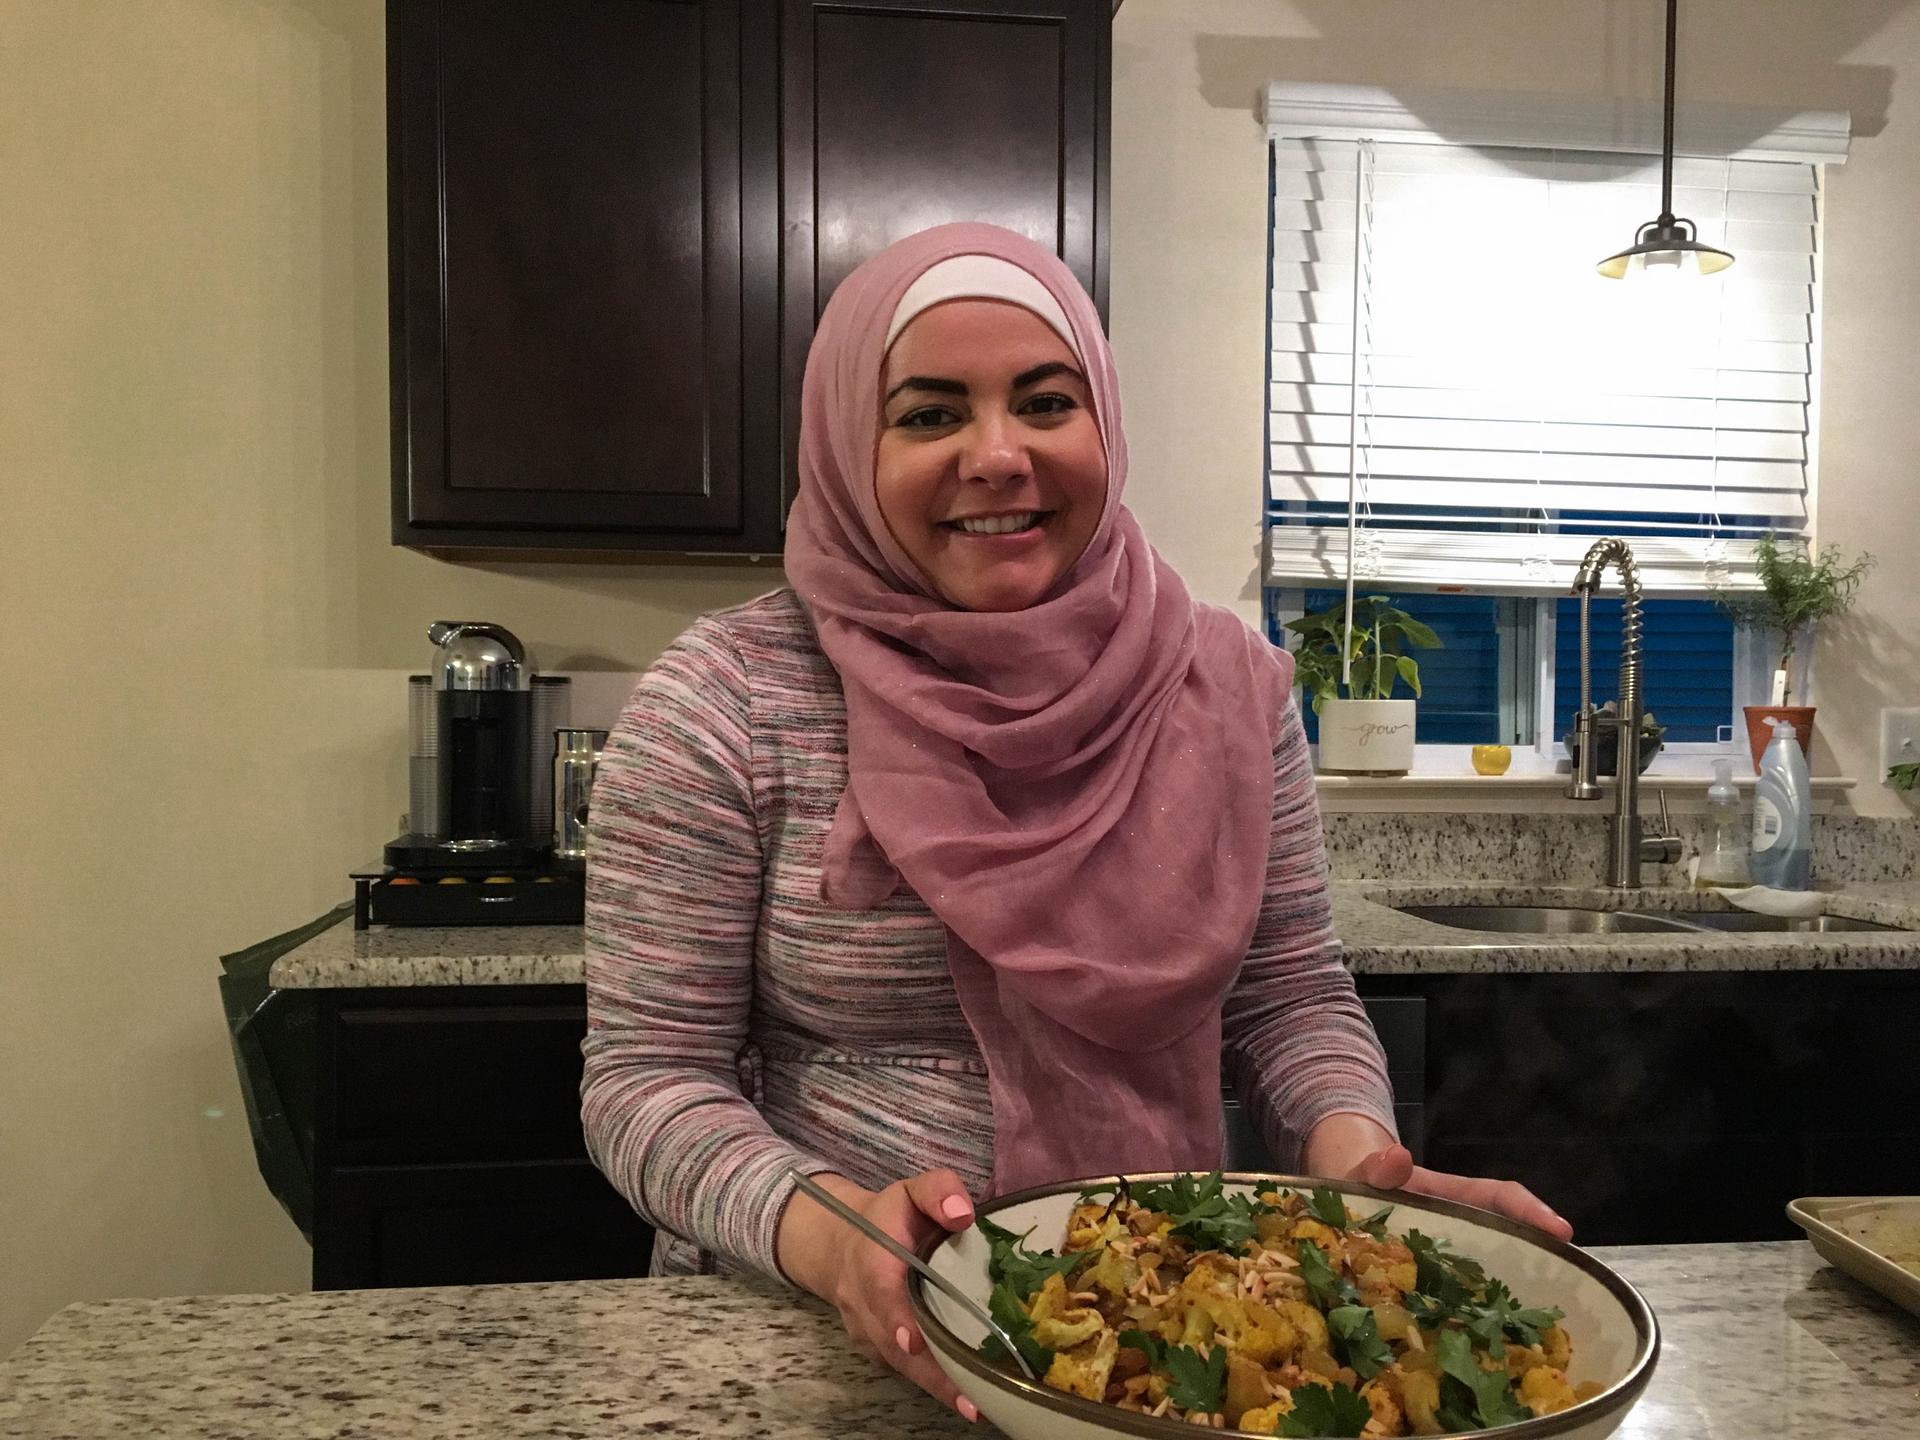 Amanda Saab came up with the idea for "Dinner With Your Muslim Neighbor." 